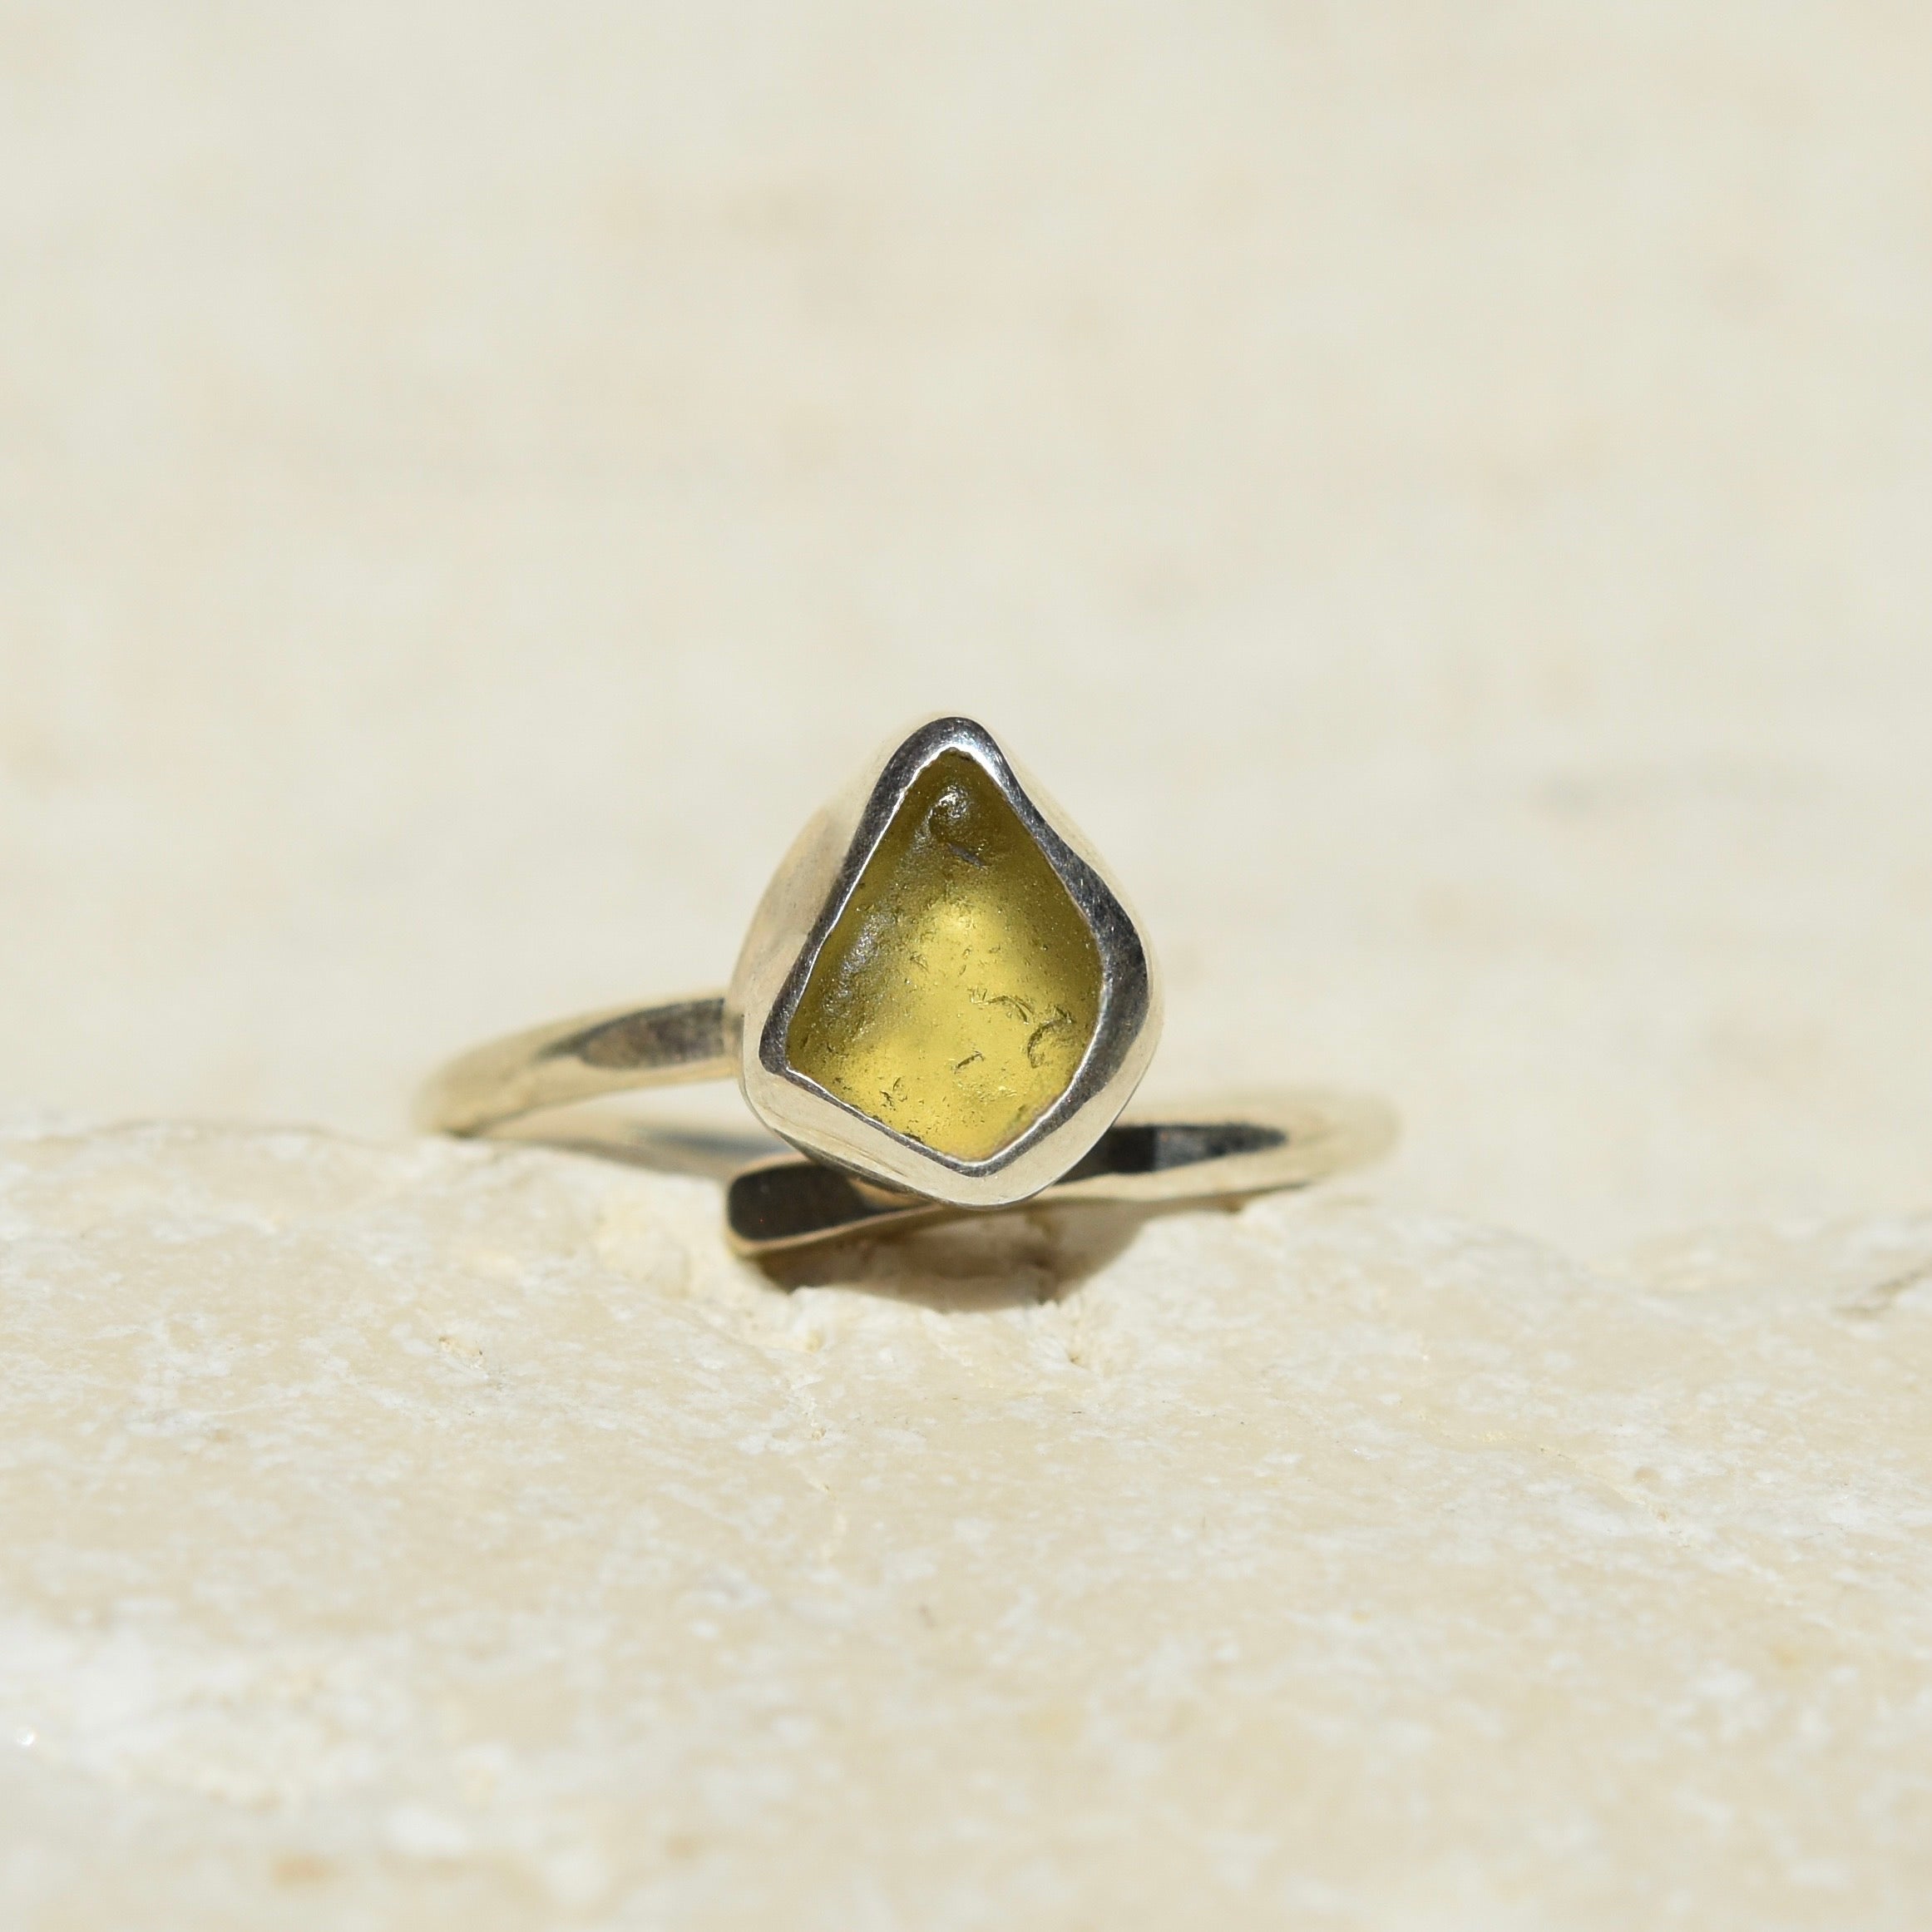 Pale Yellow Sea Glass Adjustable Ring